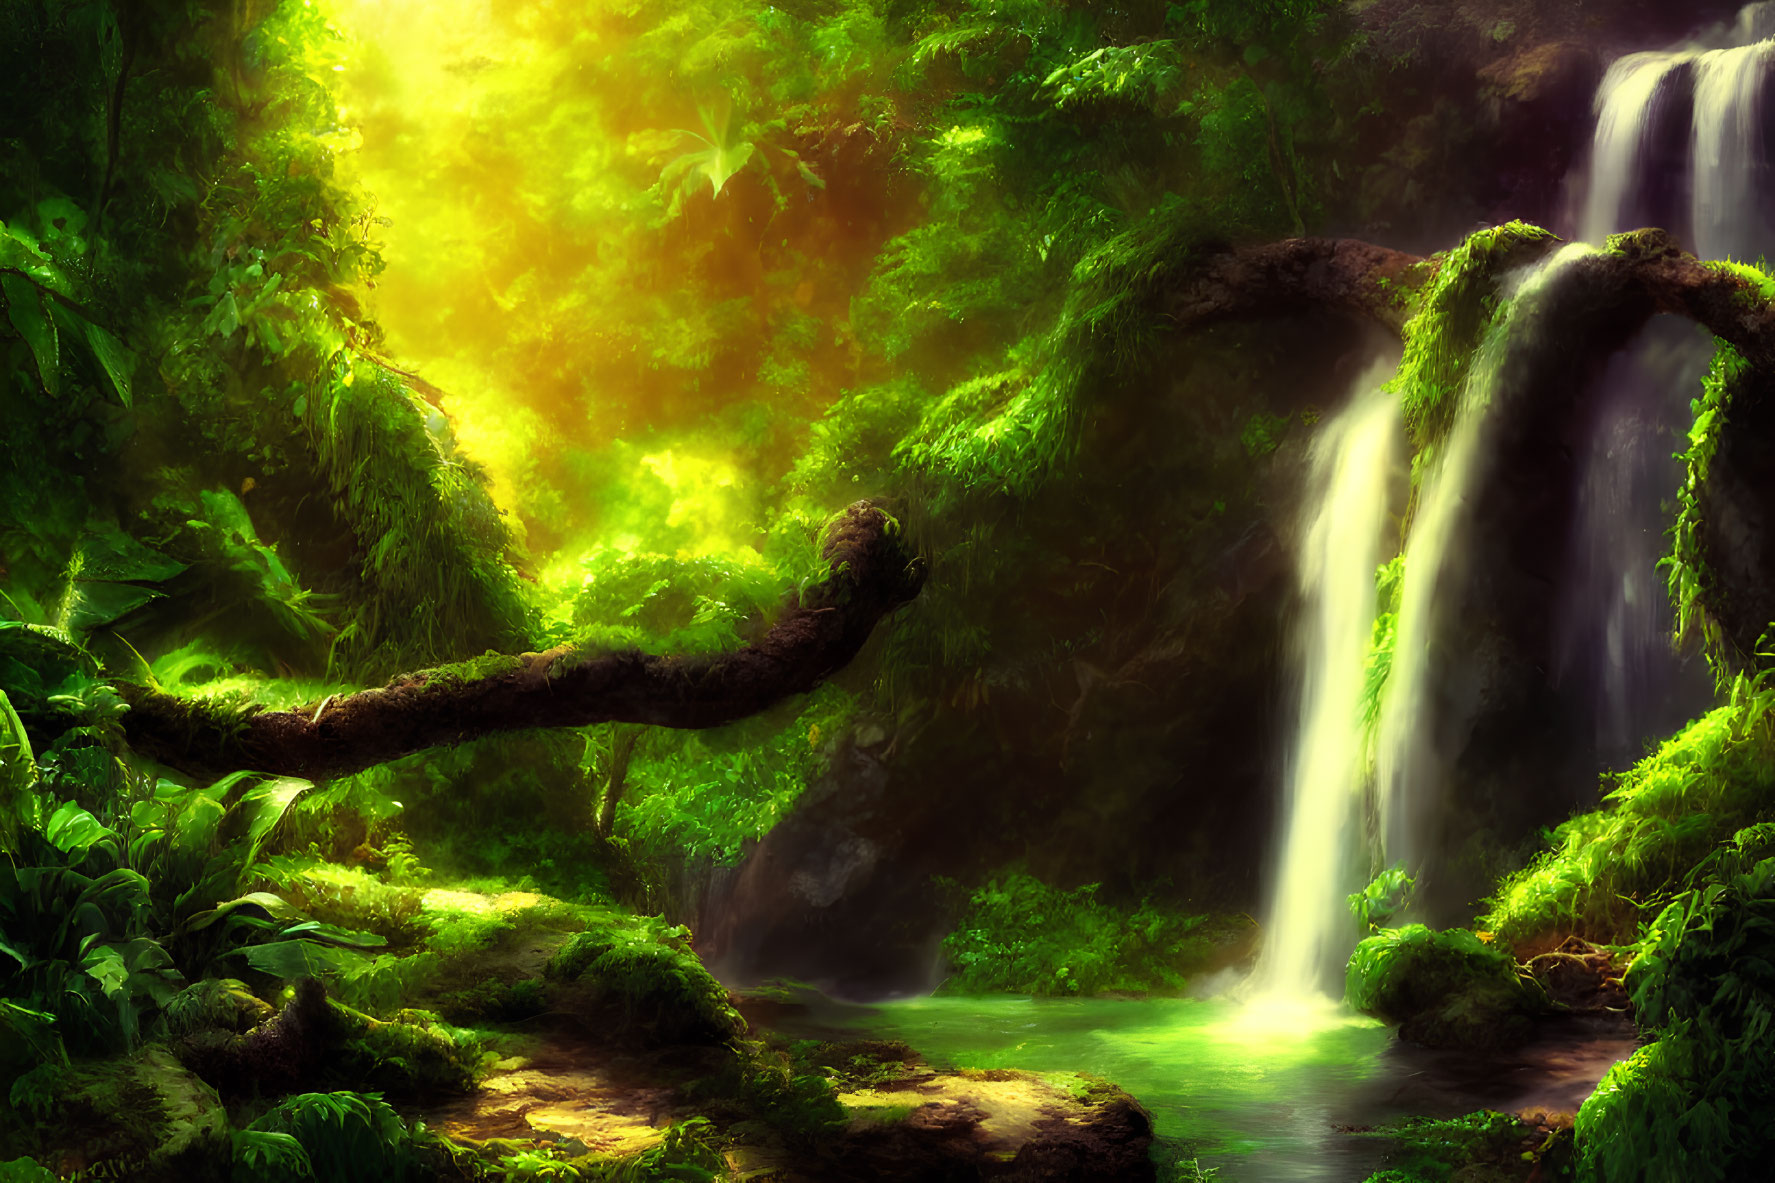 Tranquil pond with cascading waterfall in lush forest